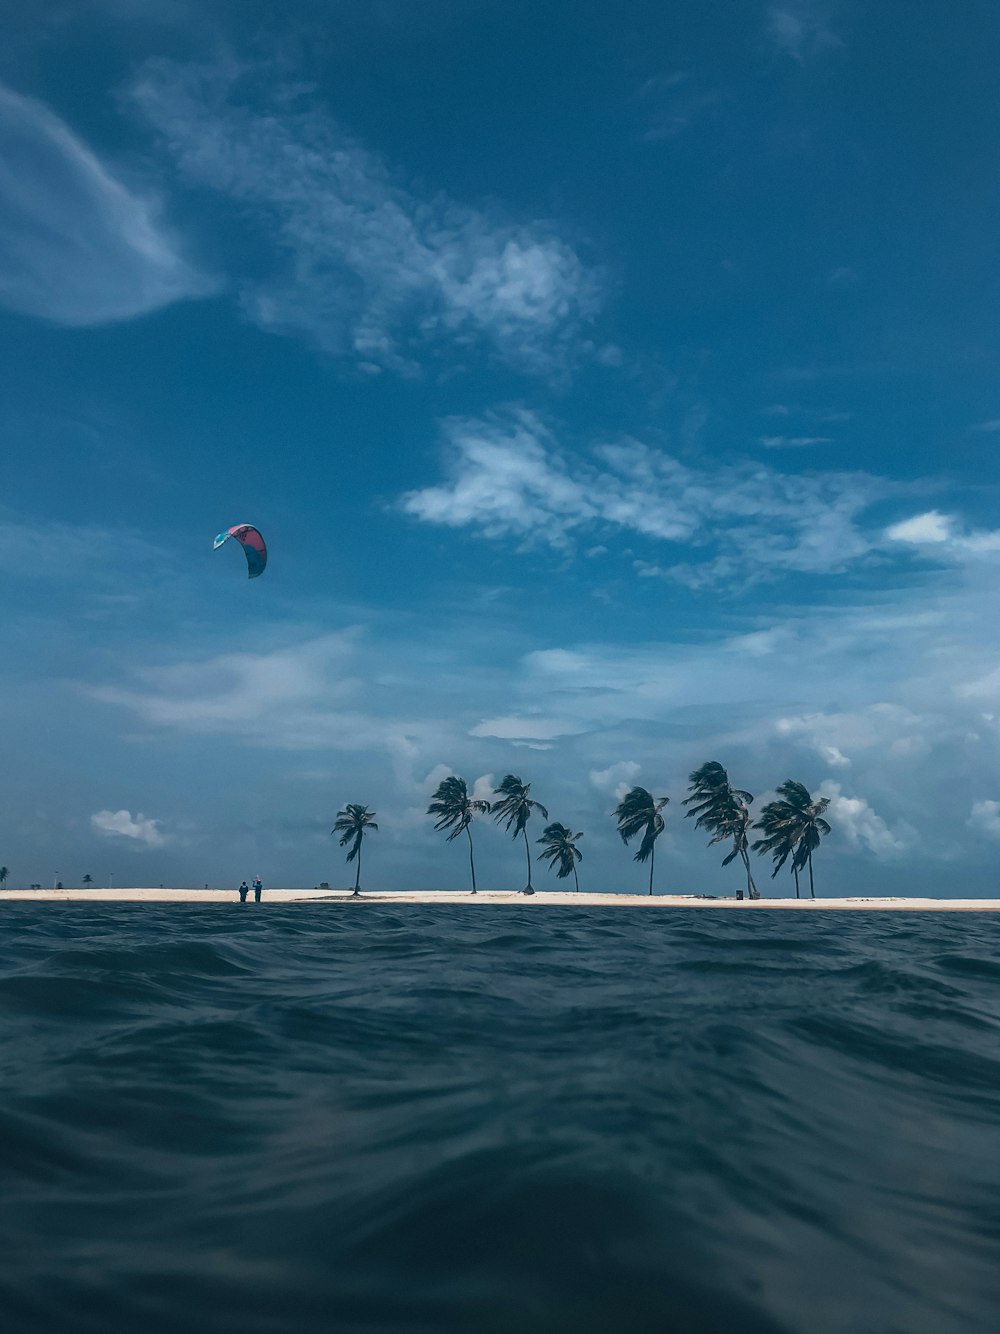 a kite flying over a beach with palm trees